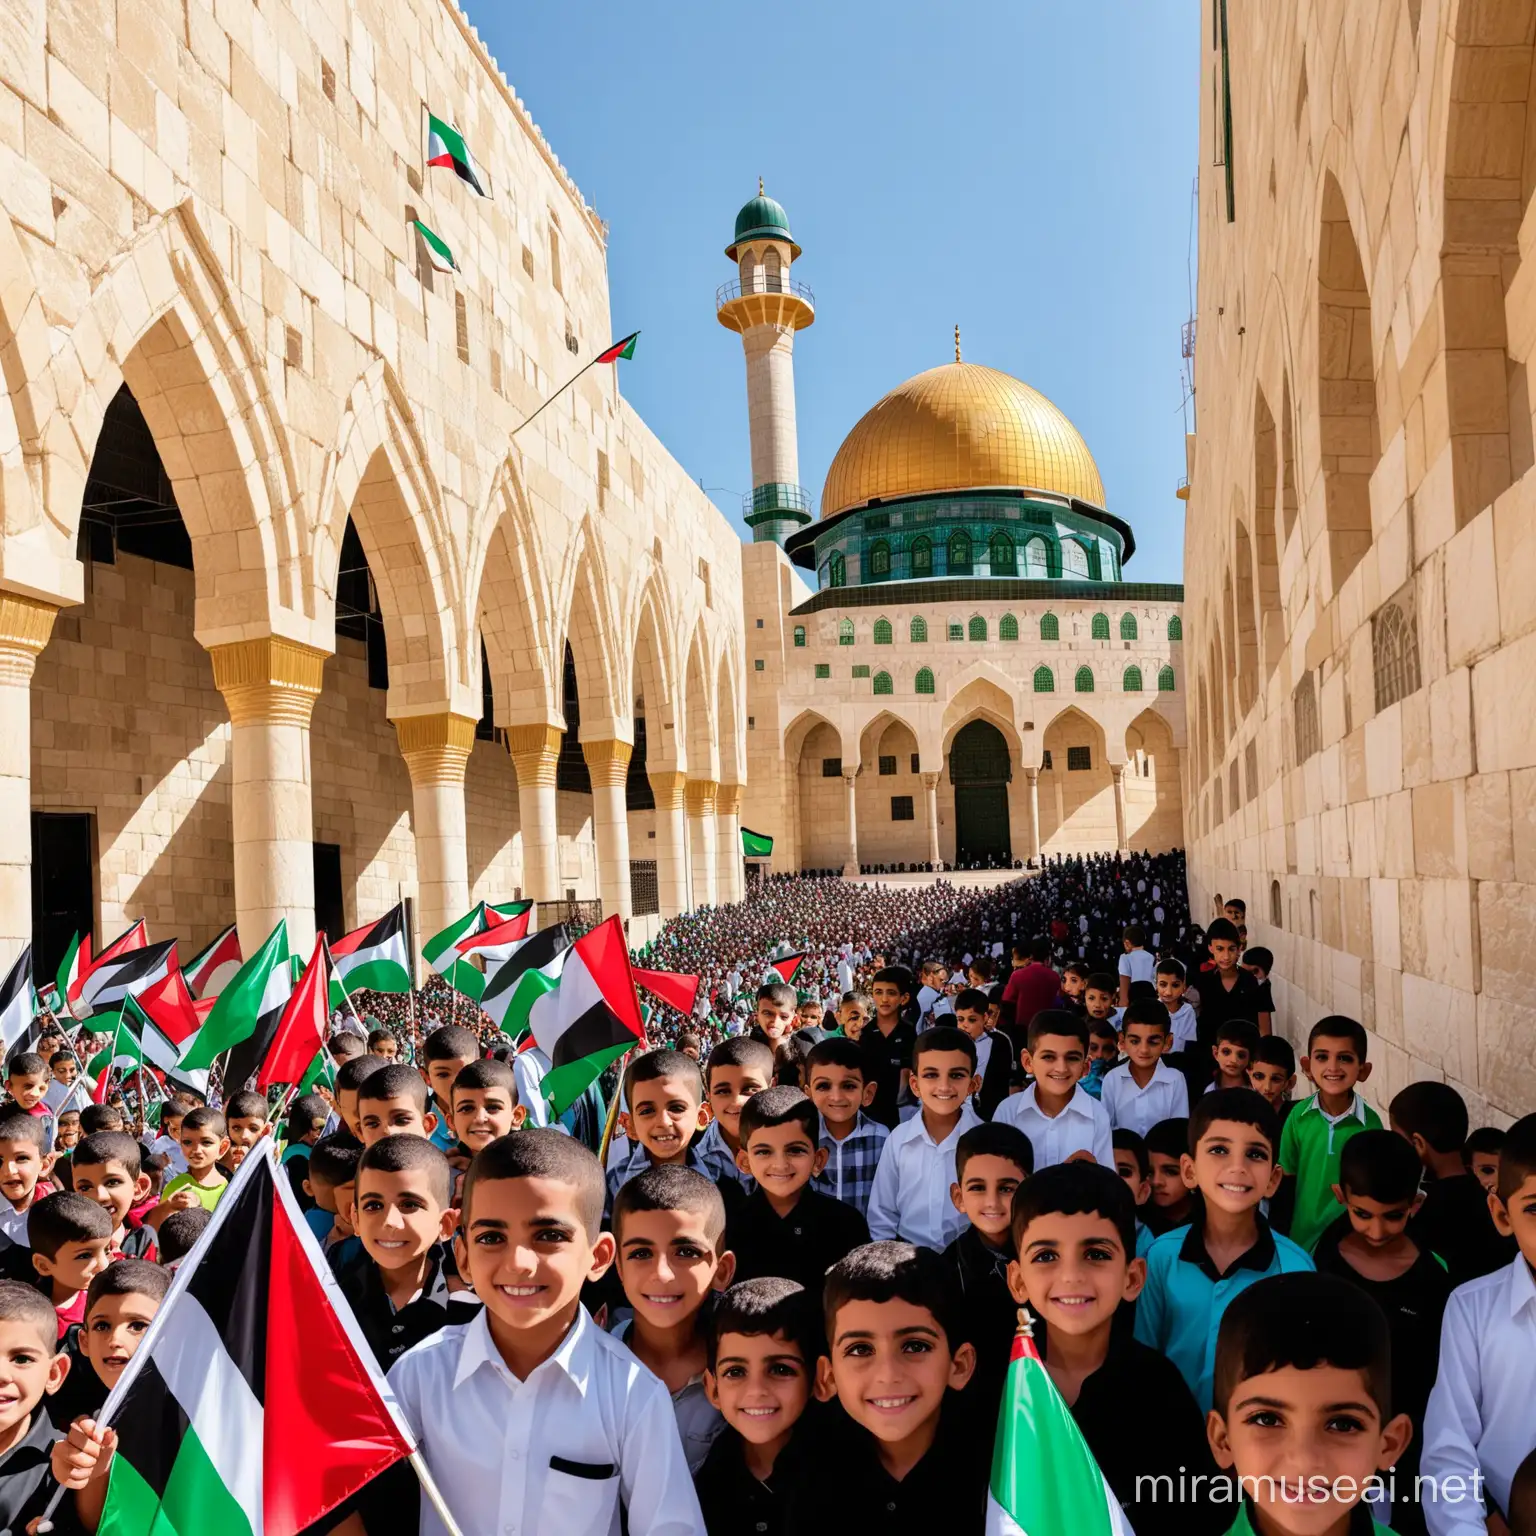 Many children of Gaza are outside of the Al-Aqsa mosque running facing the Al-Aqsa mosque with happiness and raising the flags of Palestine.